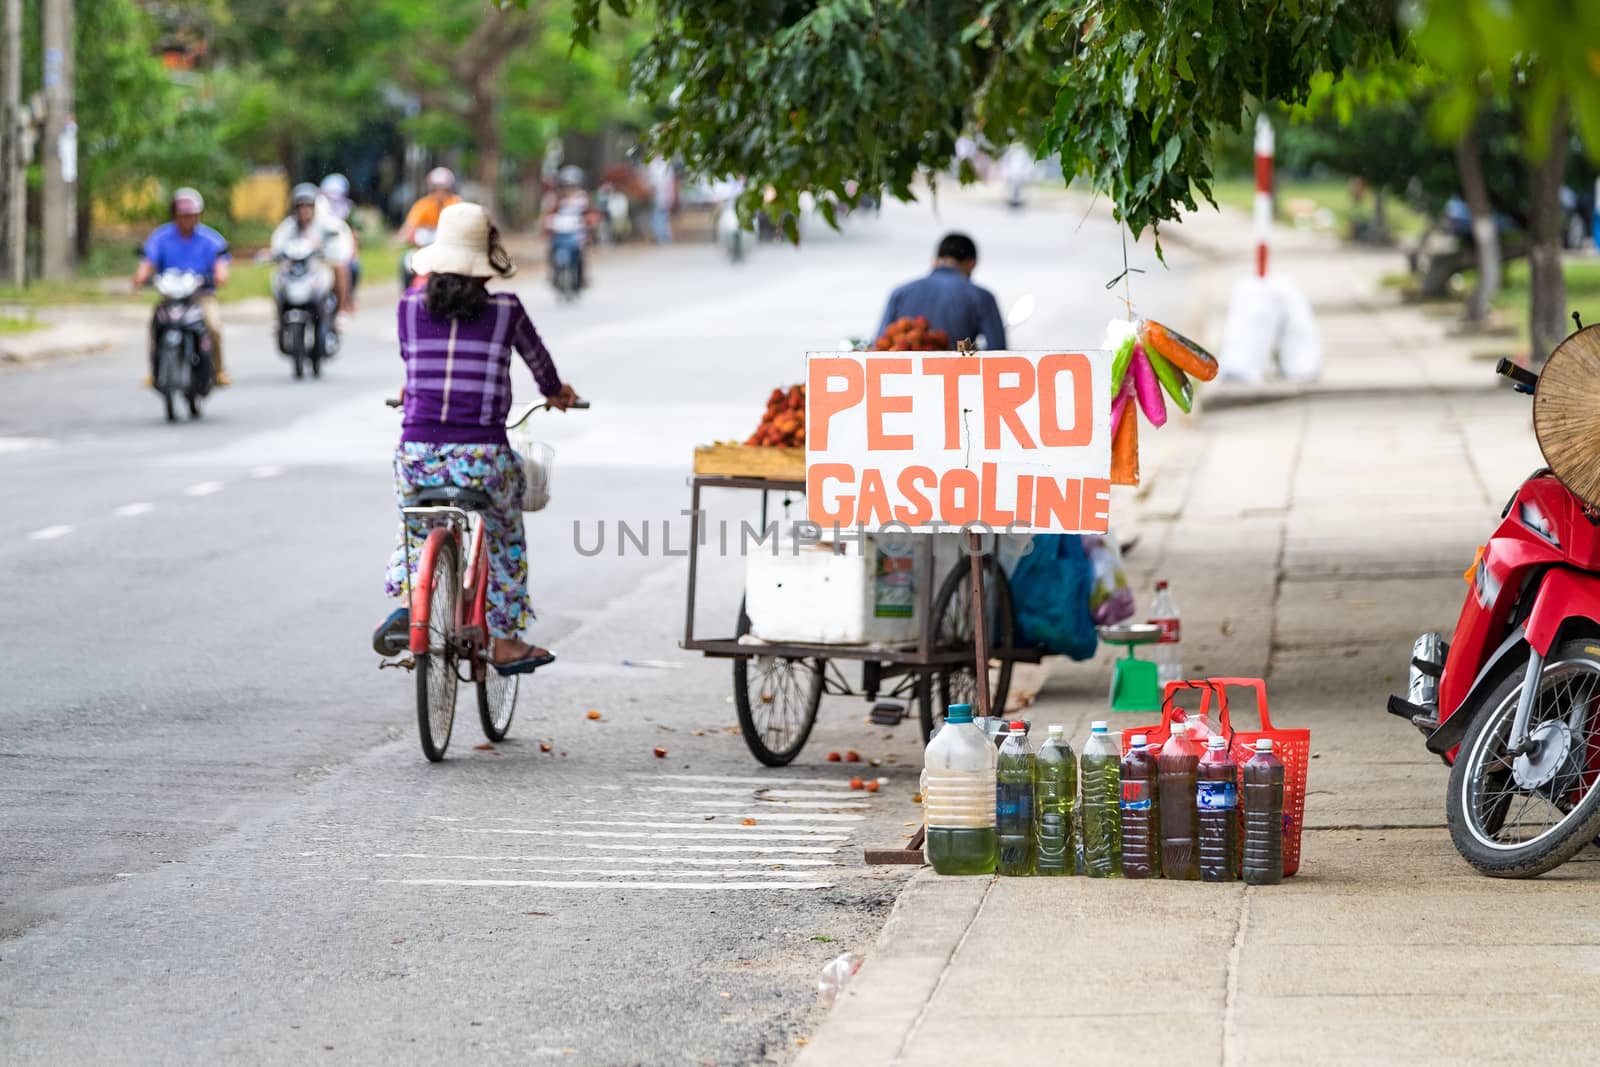 Sale of petrol on the road. HOIAN, VIETNAM May 16, 2015